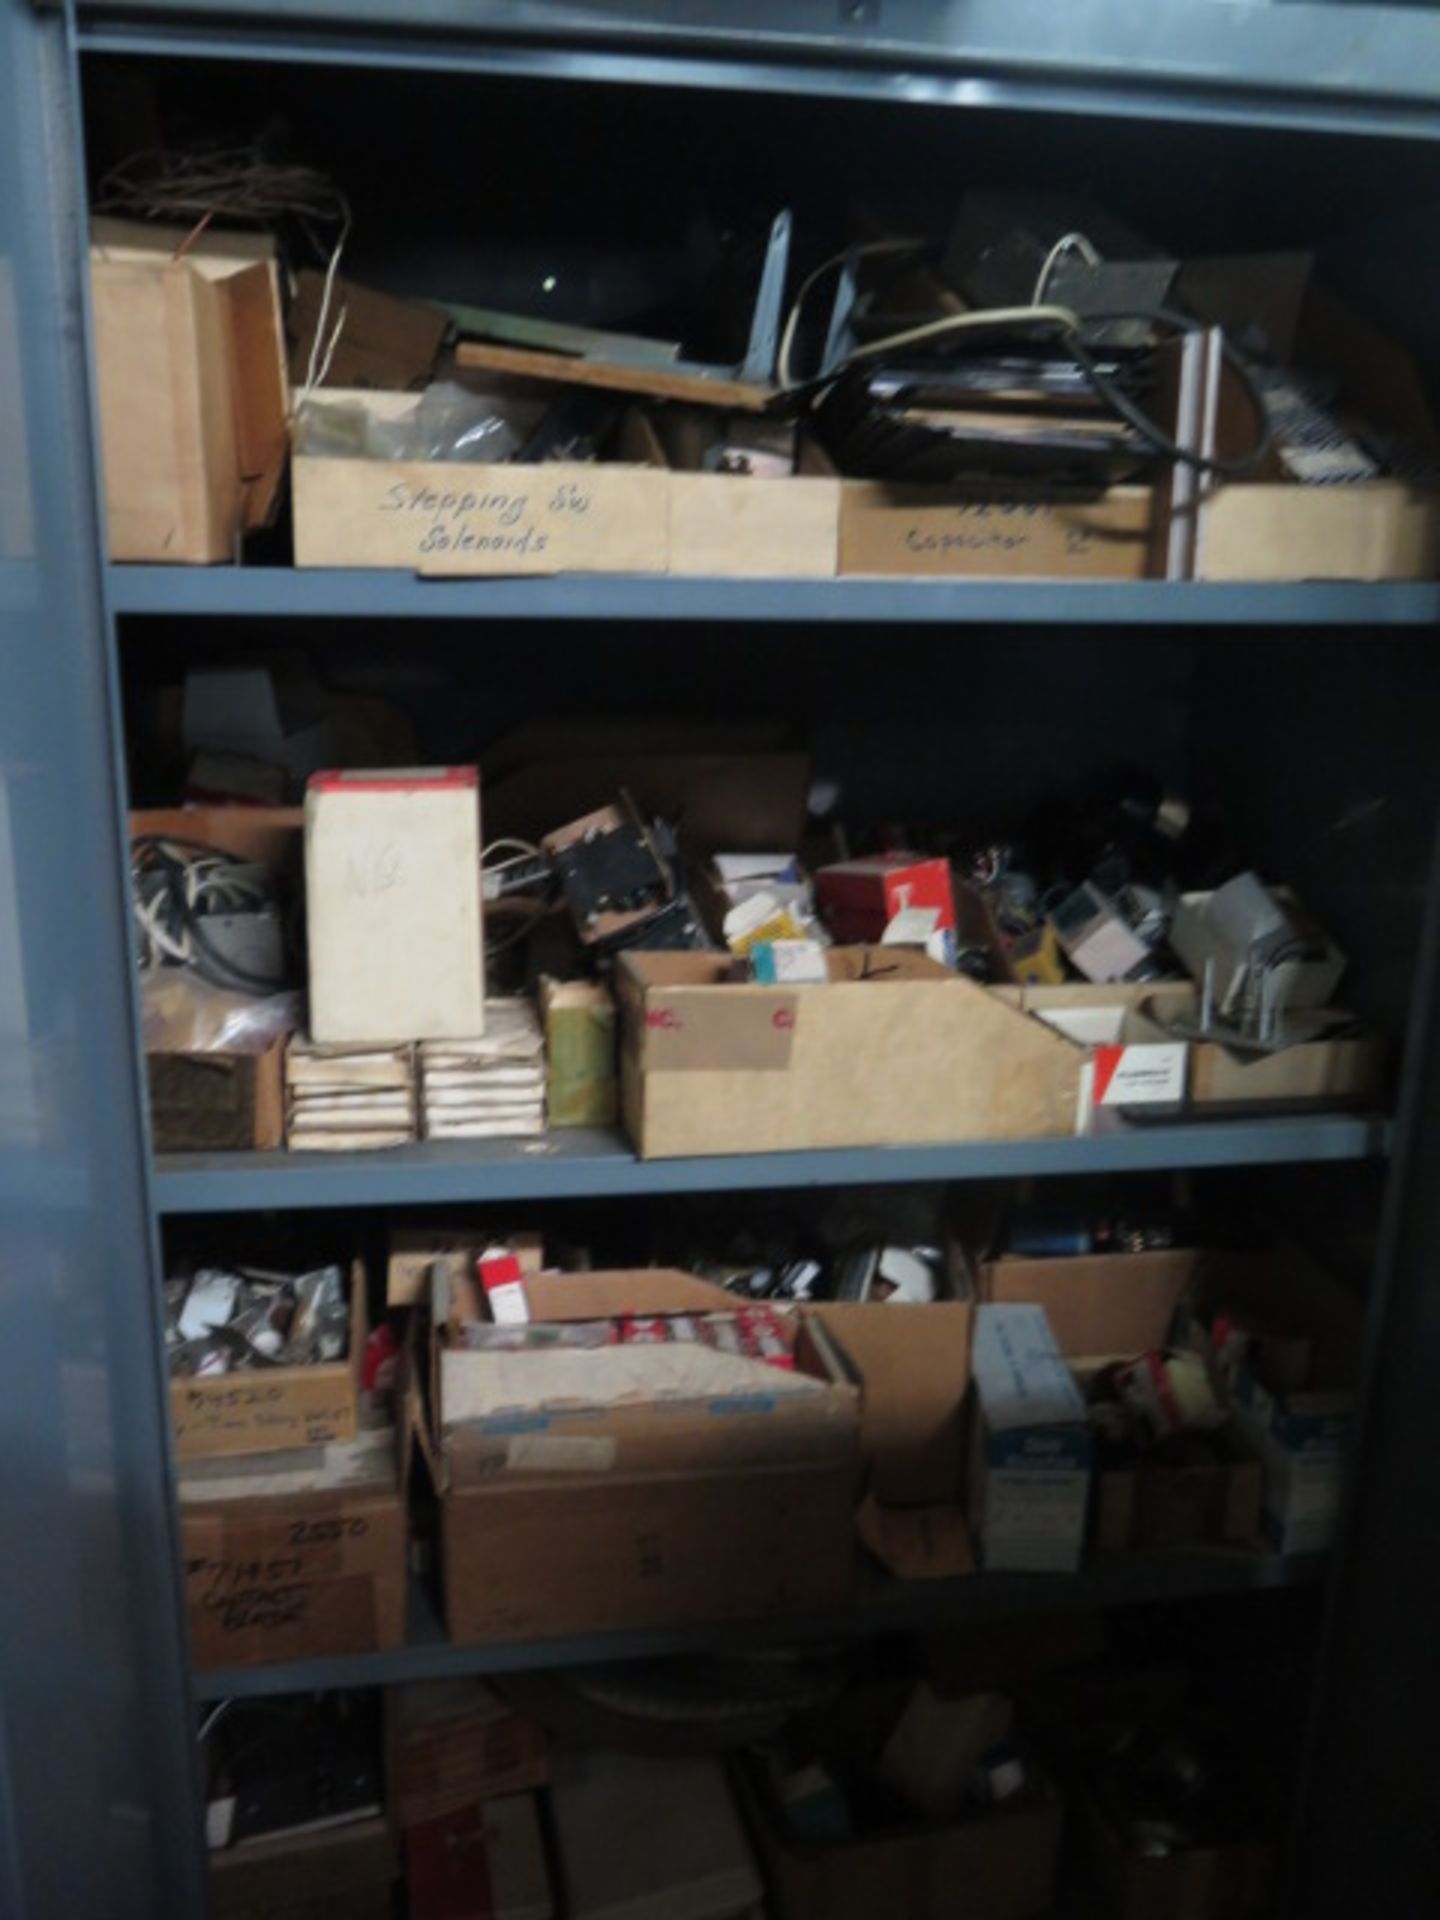 Contents of Maintenance Area, Repair Parts, Electrical, Shop Supplies, Tables, Cabinets and - Image 13 of 20